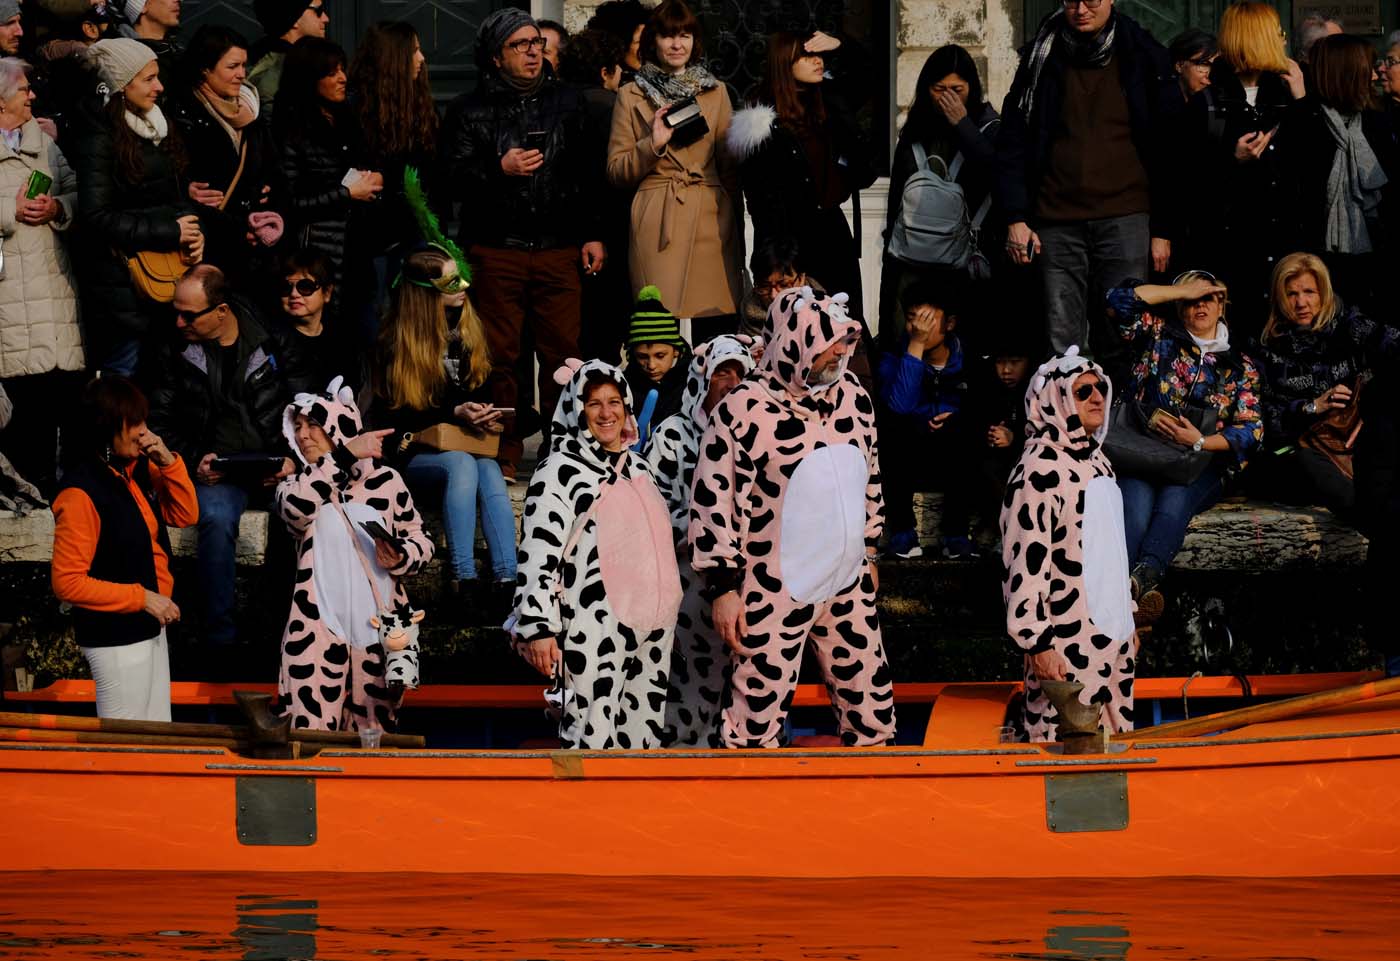 Revellers are seen during the masquerade parade on the Grand Canal during the Carnival in Venice, Italy January 28, 2018. REUTERS/Manuel Silvestri